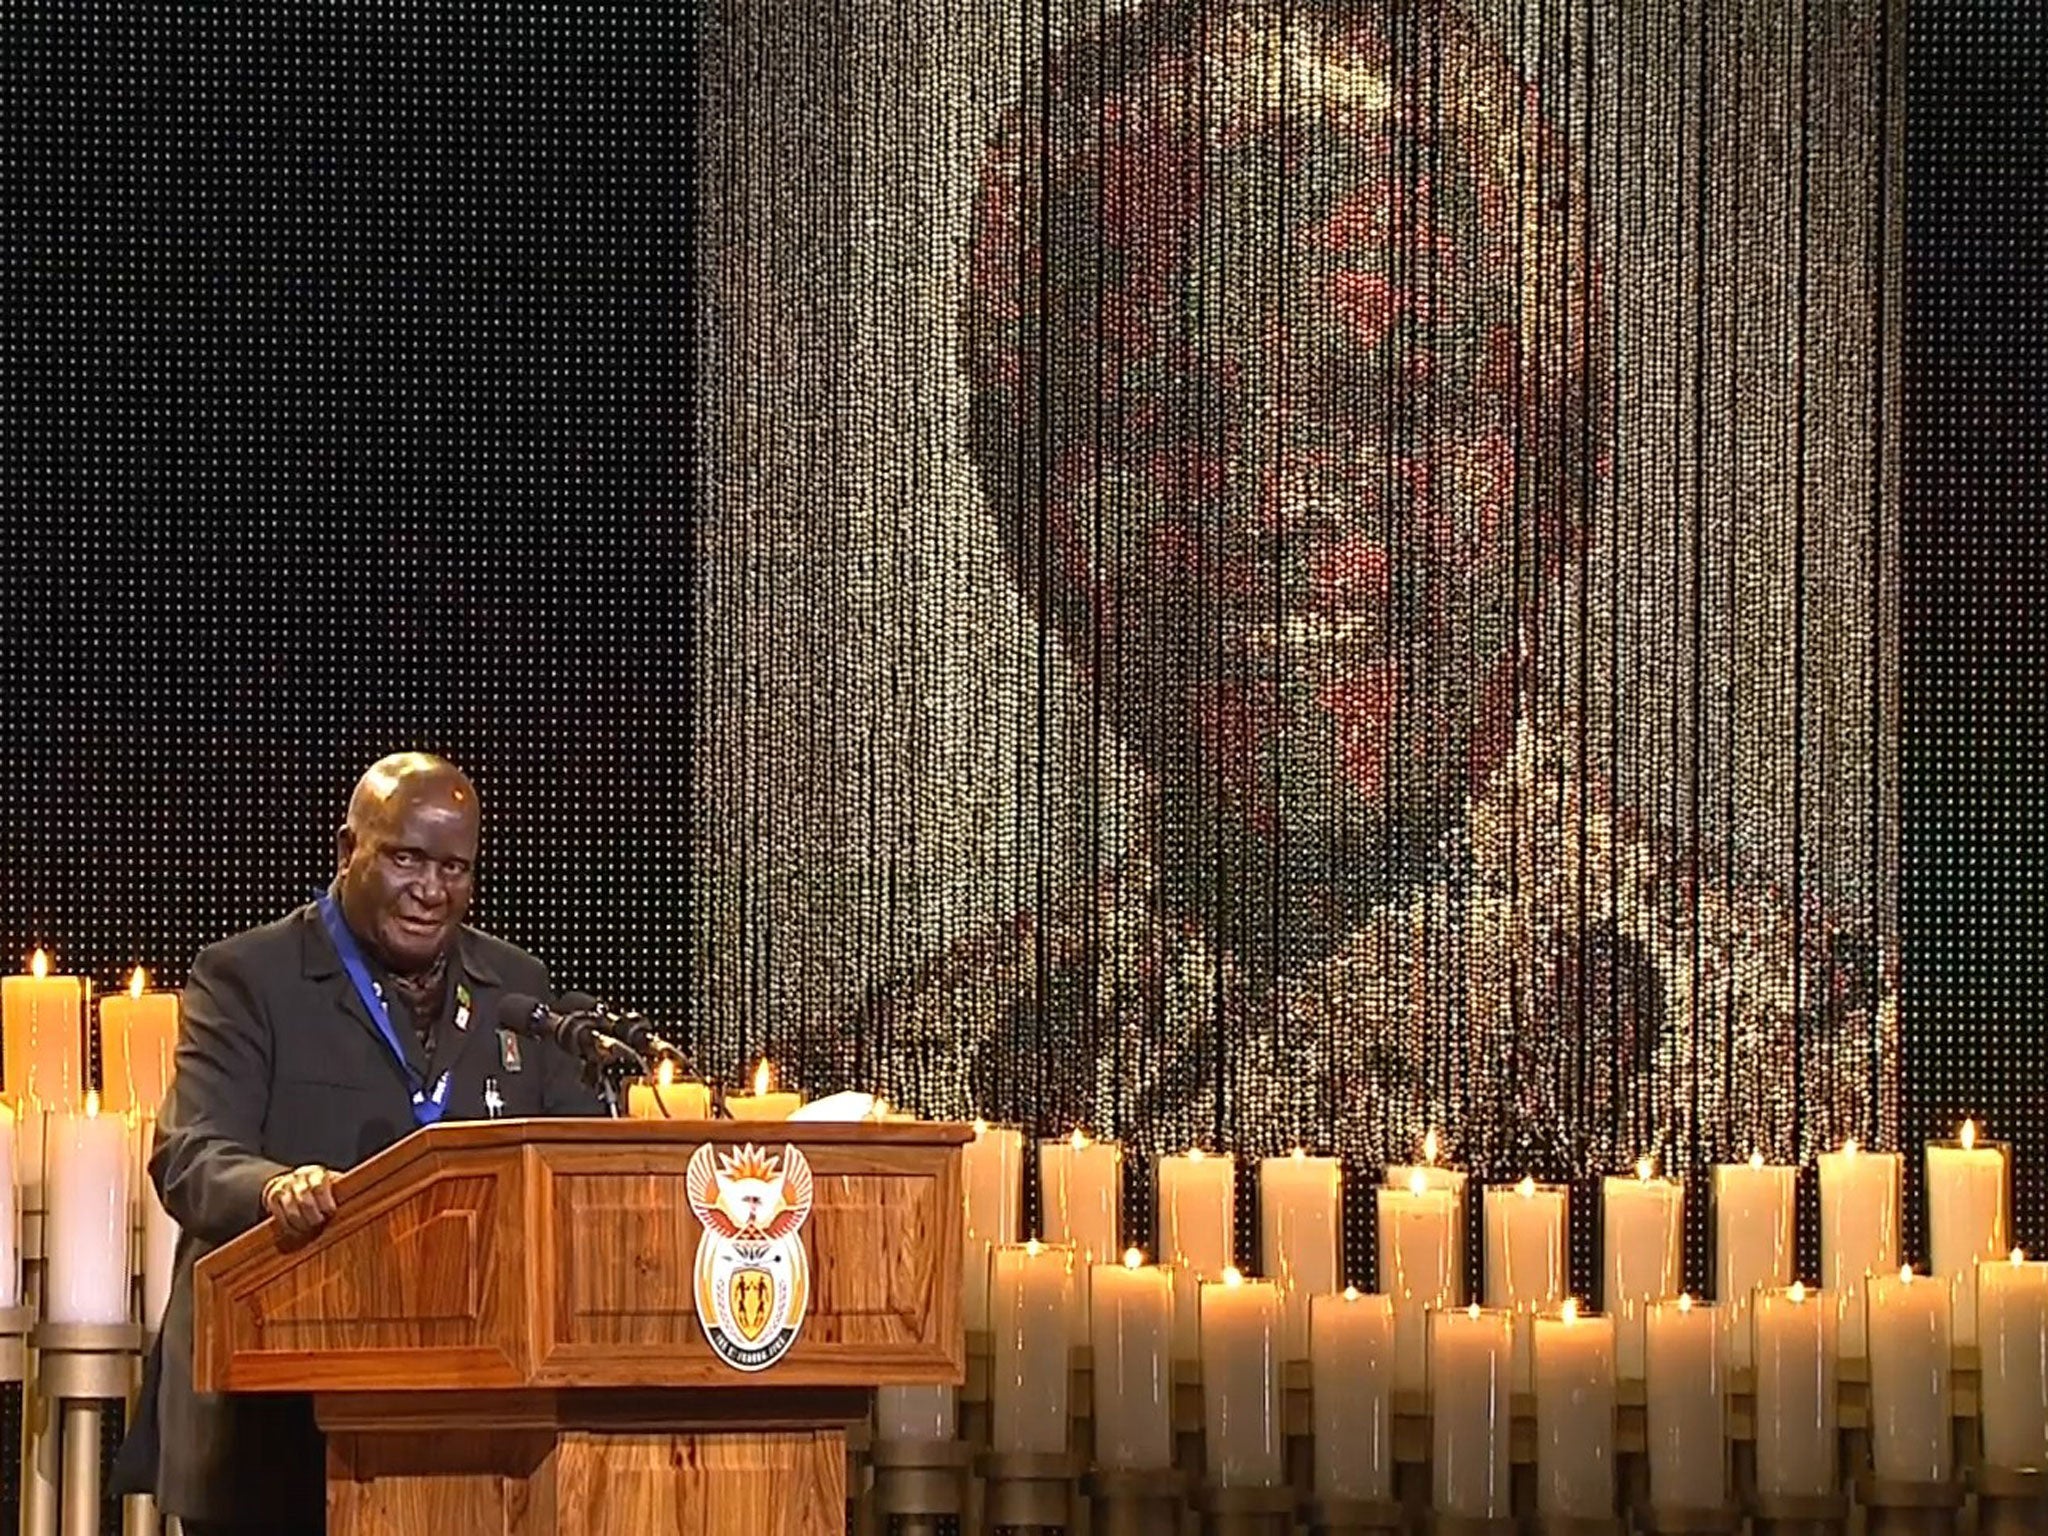 Zambia's President Kenneth David Kaunda speaking during the funeral service for late South African former President Nelson Mandela